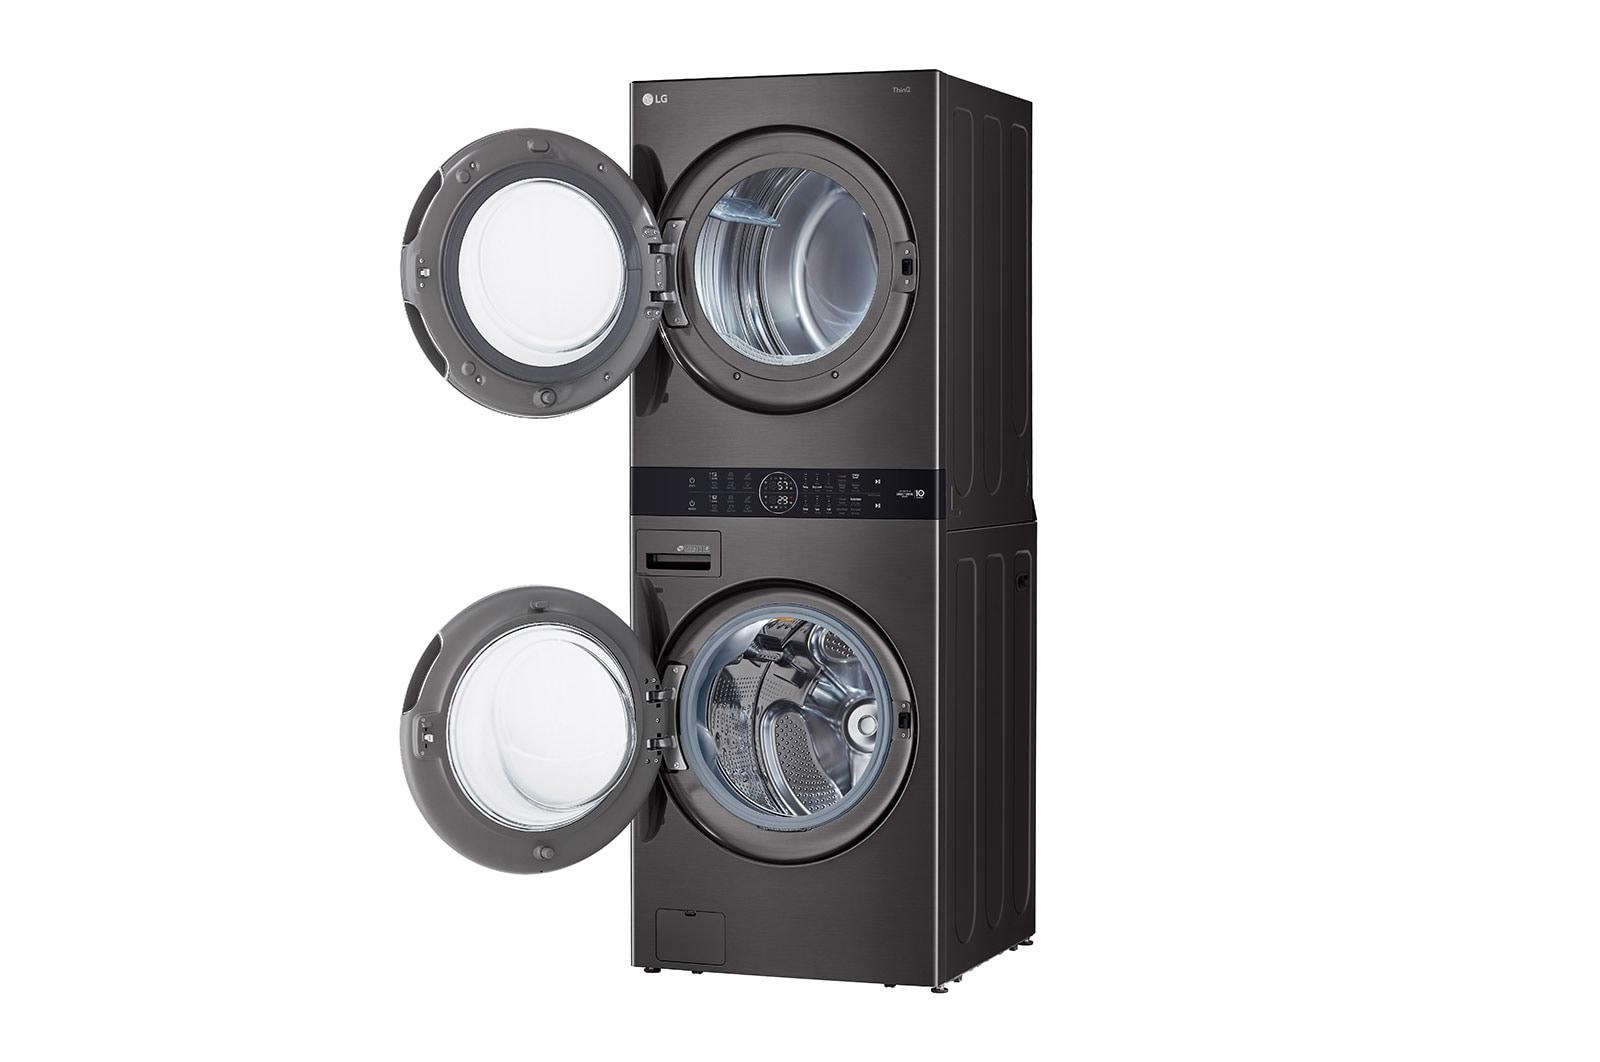 Lg Single Unit Front Load LG WashTower™ with Center Control™ 4.5 cu. ft. Washer and 7.4 cu. ft. Electric Dryer